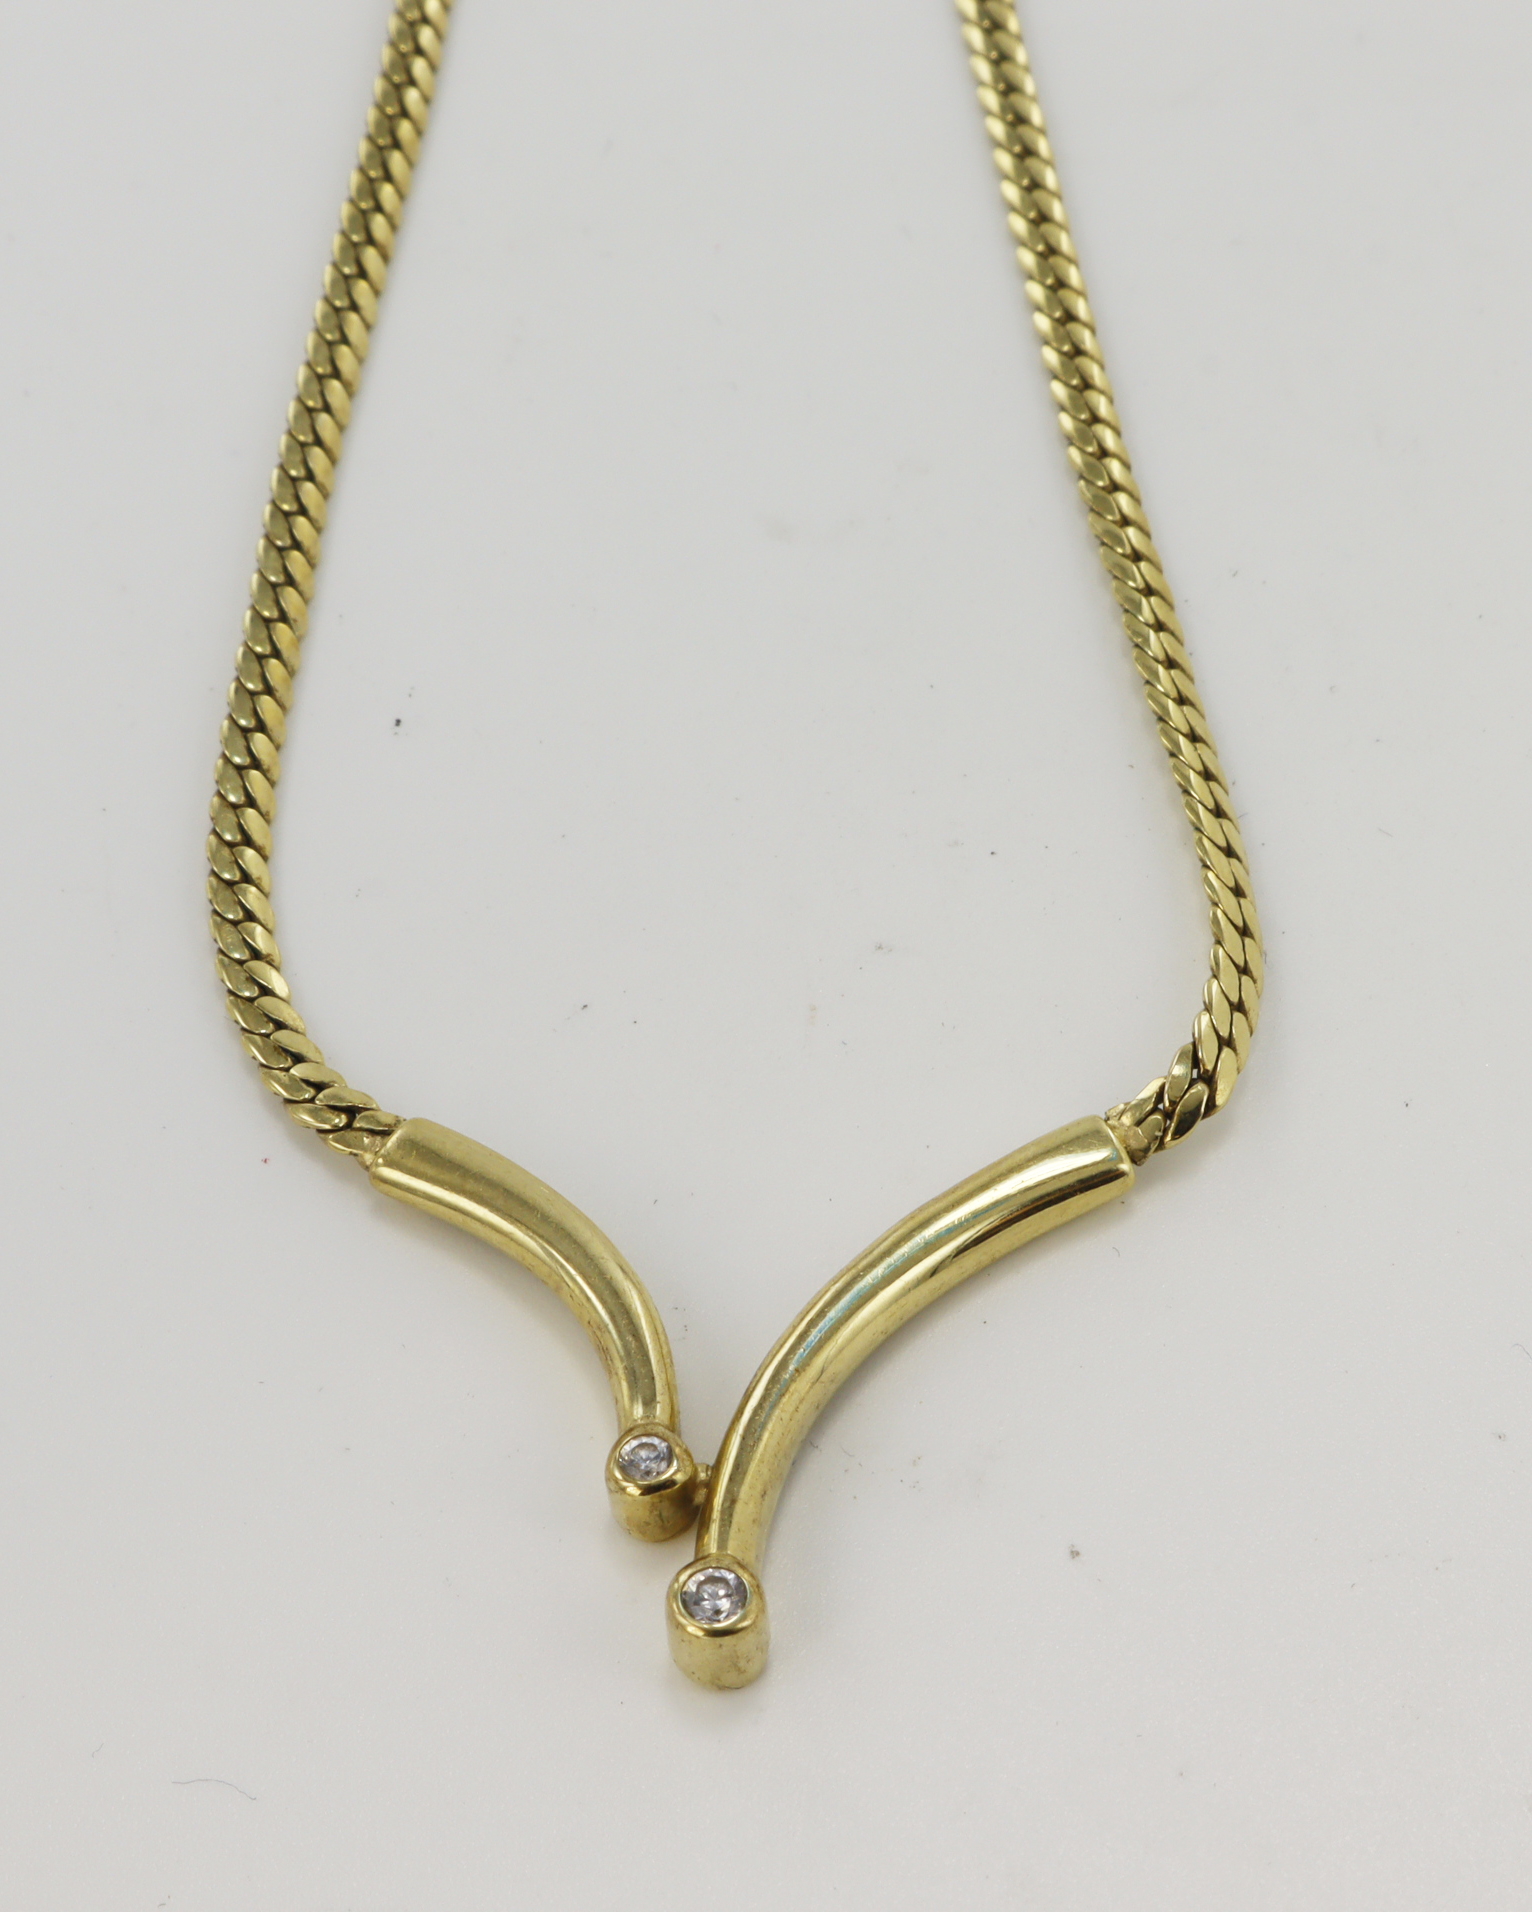 9ct yellow gold CZ collar necklace, integral pendant set with two CZ's, chain width 2.5mm, length